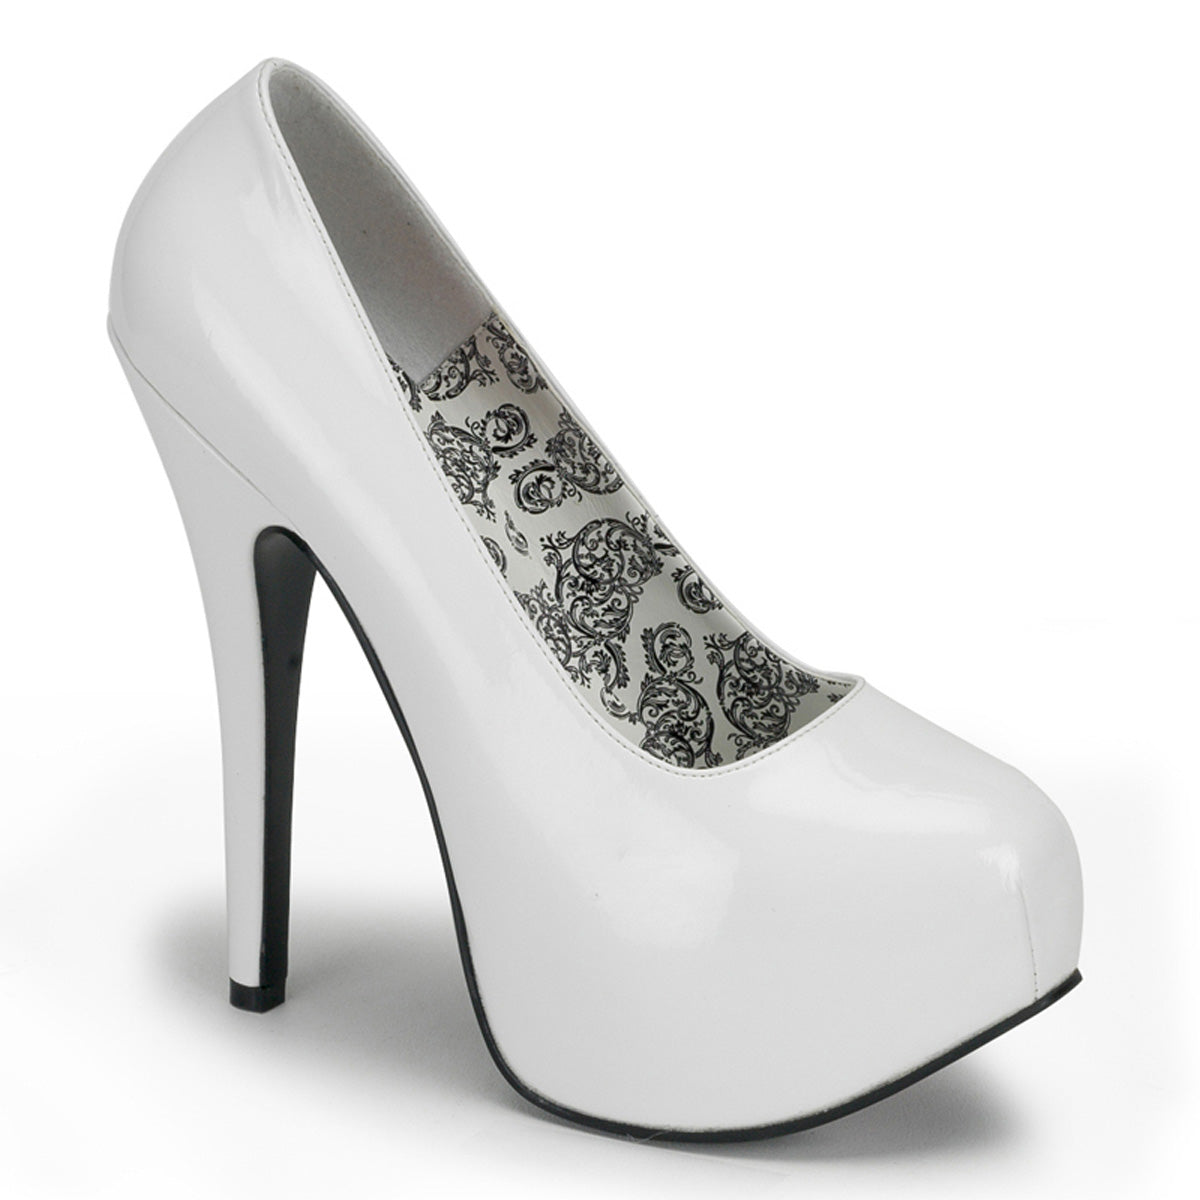 6 Inch Heel White Patent Sexy Shoes-Bordello- Sexy Shoes Fetish Heels